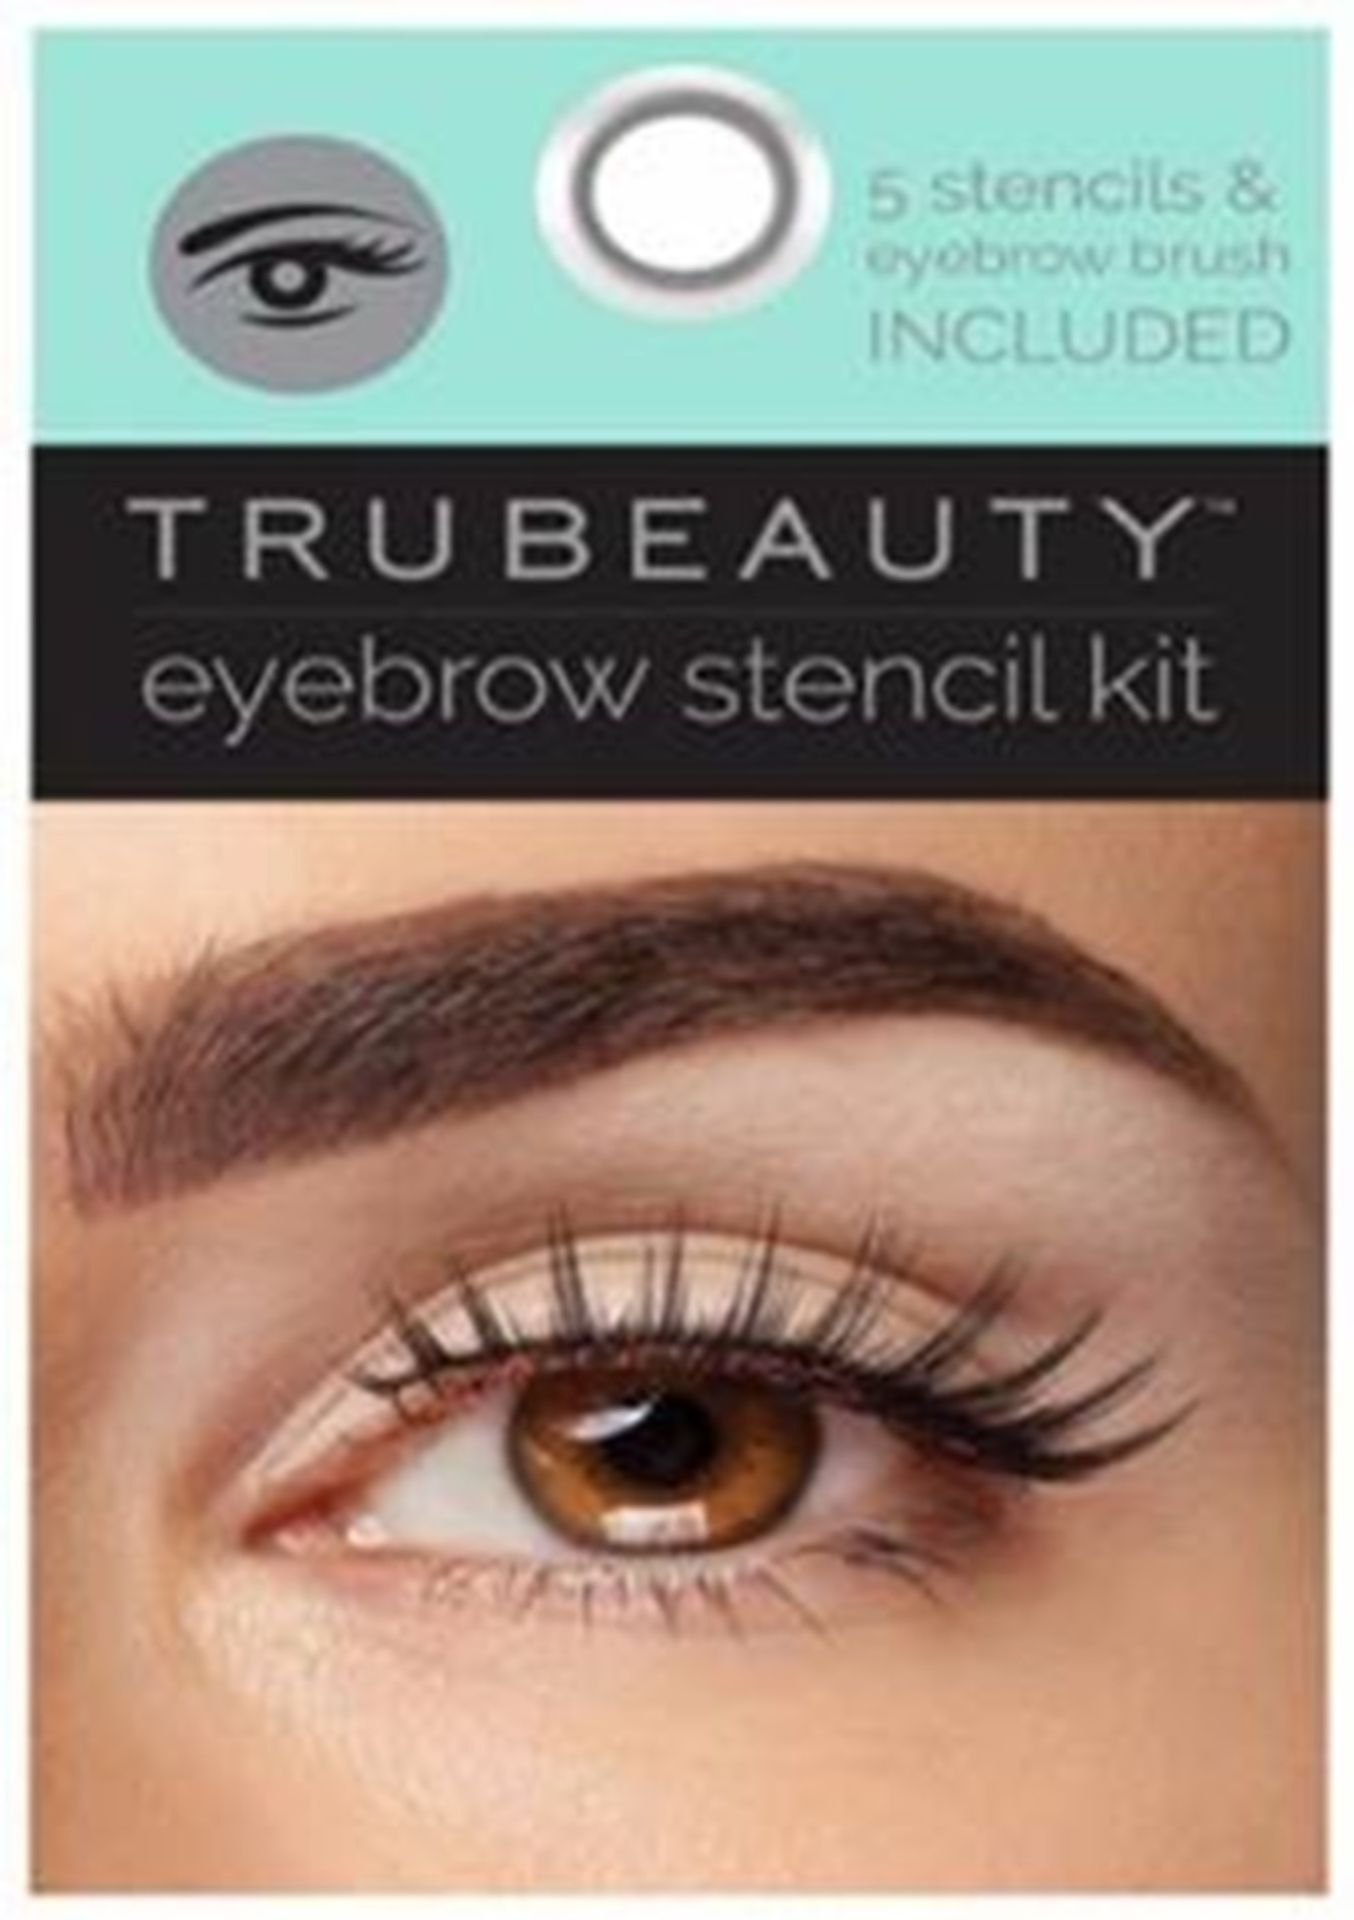 100 x TruBeauty Eyebrow Stencil Kit | Total RRP £199 - Image 2 of 2